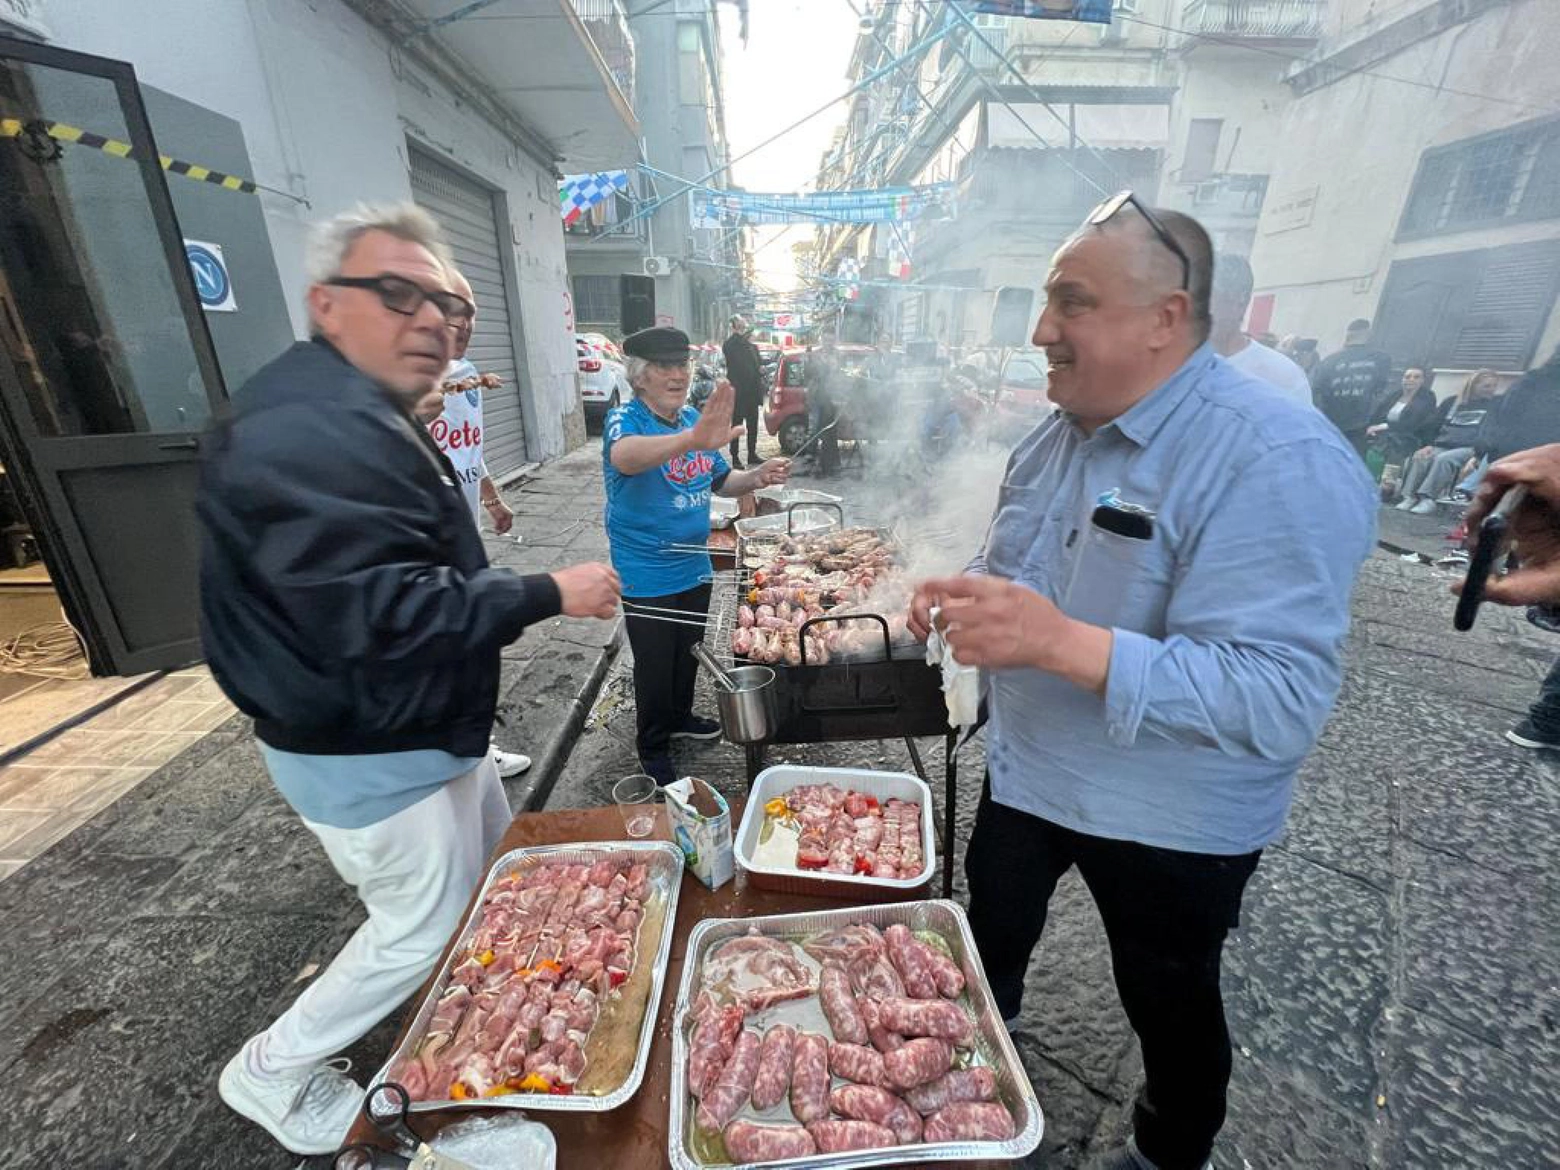 SSC Napoli’s supporters wait for the Italian Serie A soccer match against Udinese Calcio in the centre of Naples, Italy, 04 May 2023.
ANSA